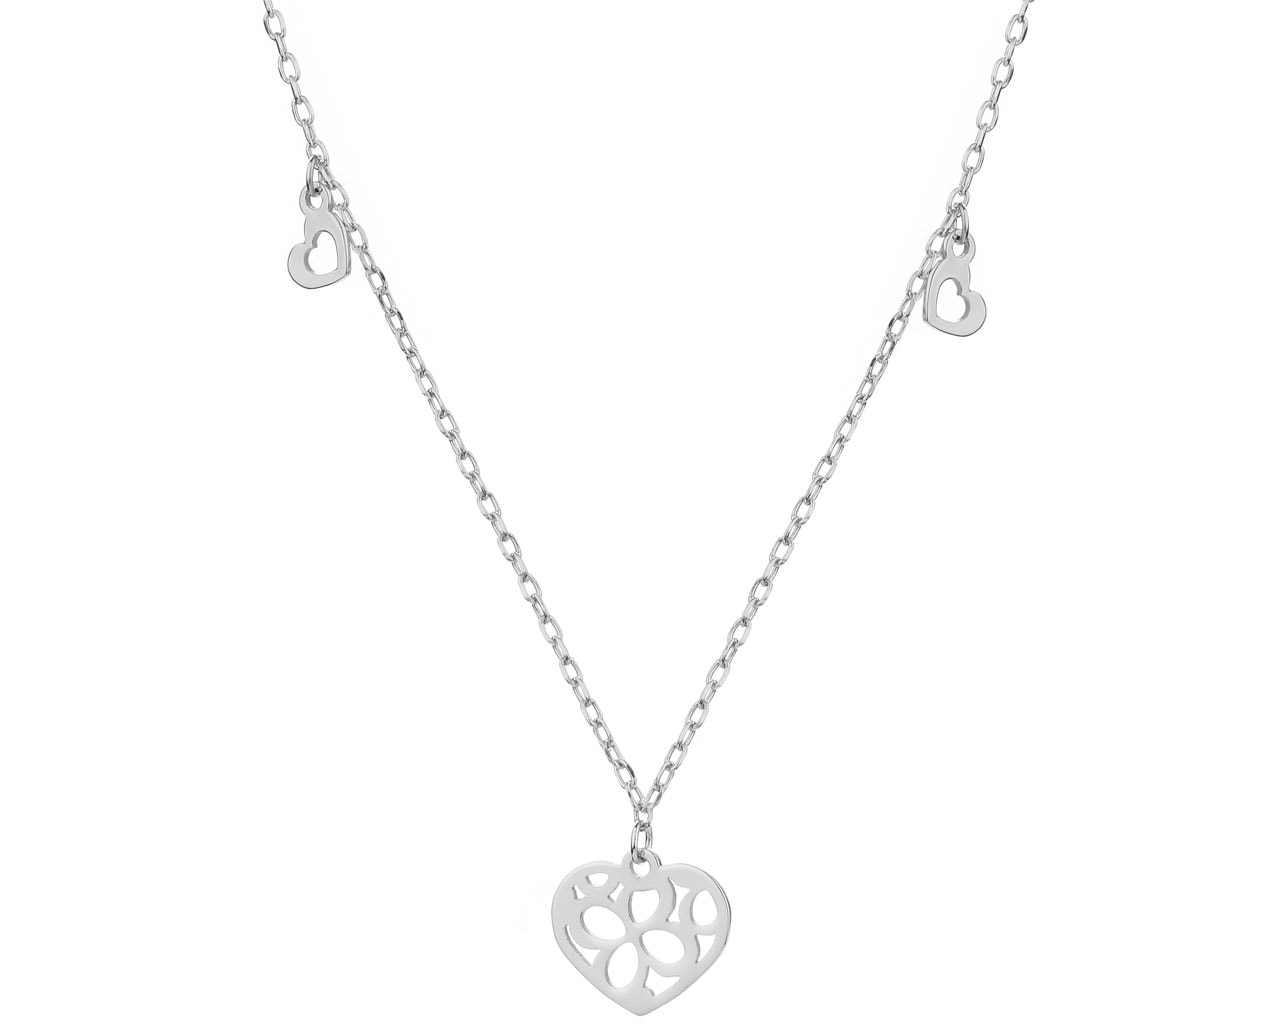 Sterling silver necklace - hearts